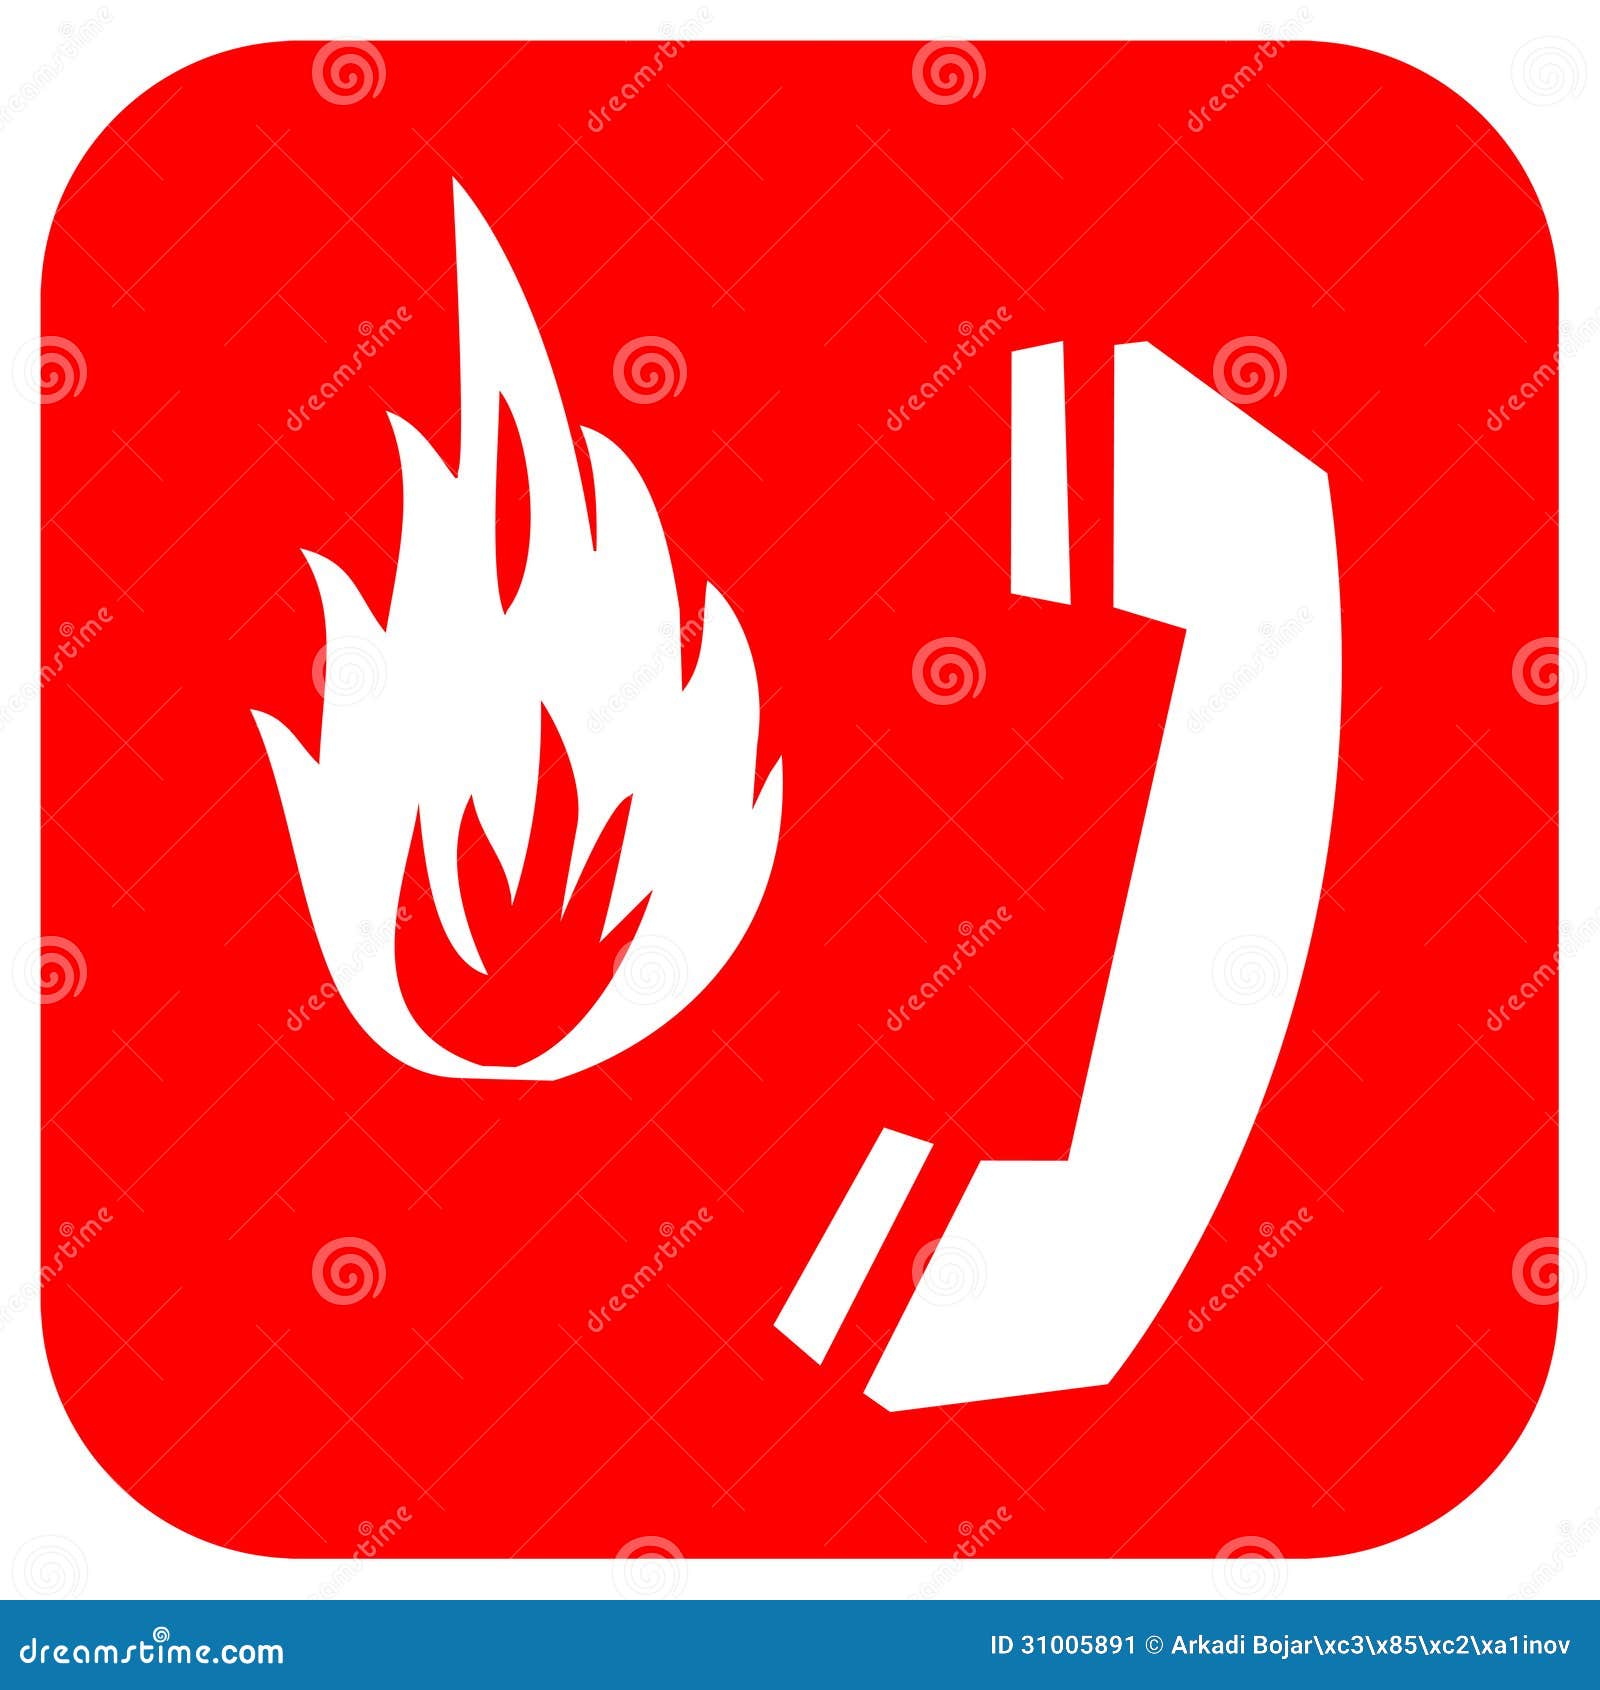 clipart fire signs - photo #48